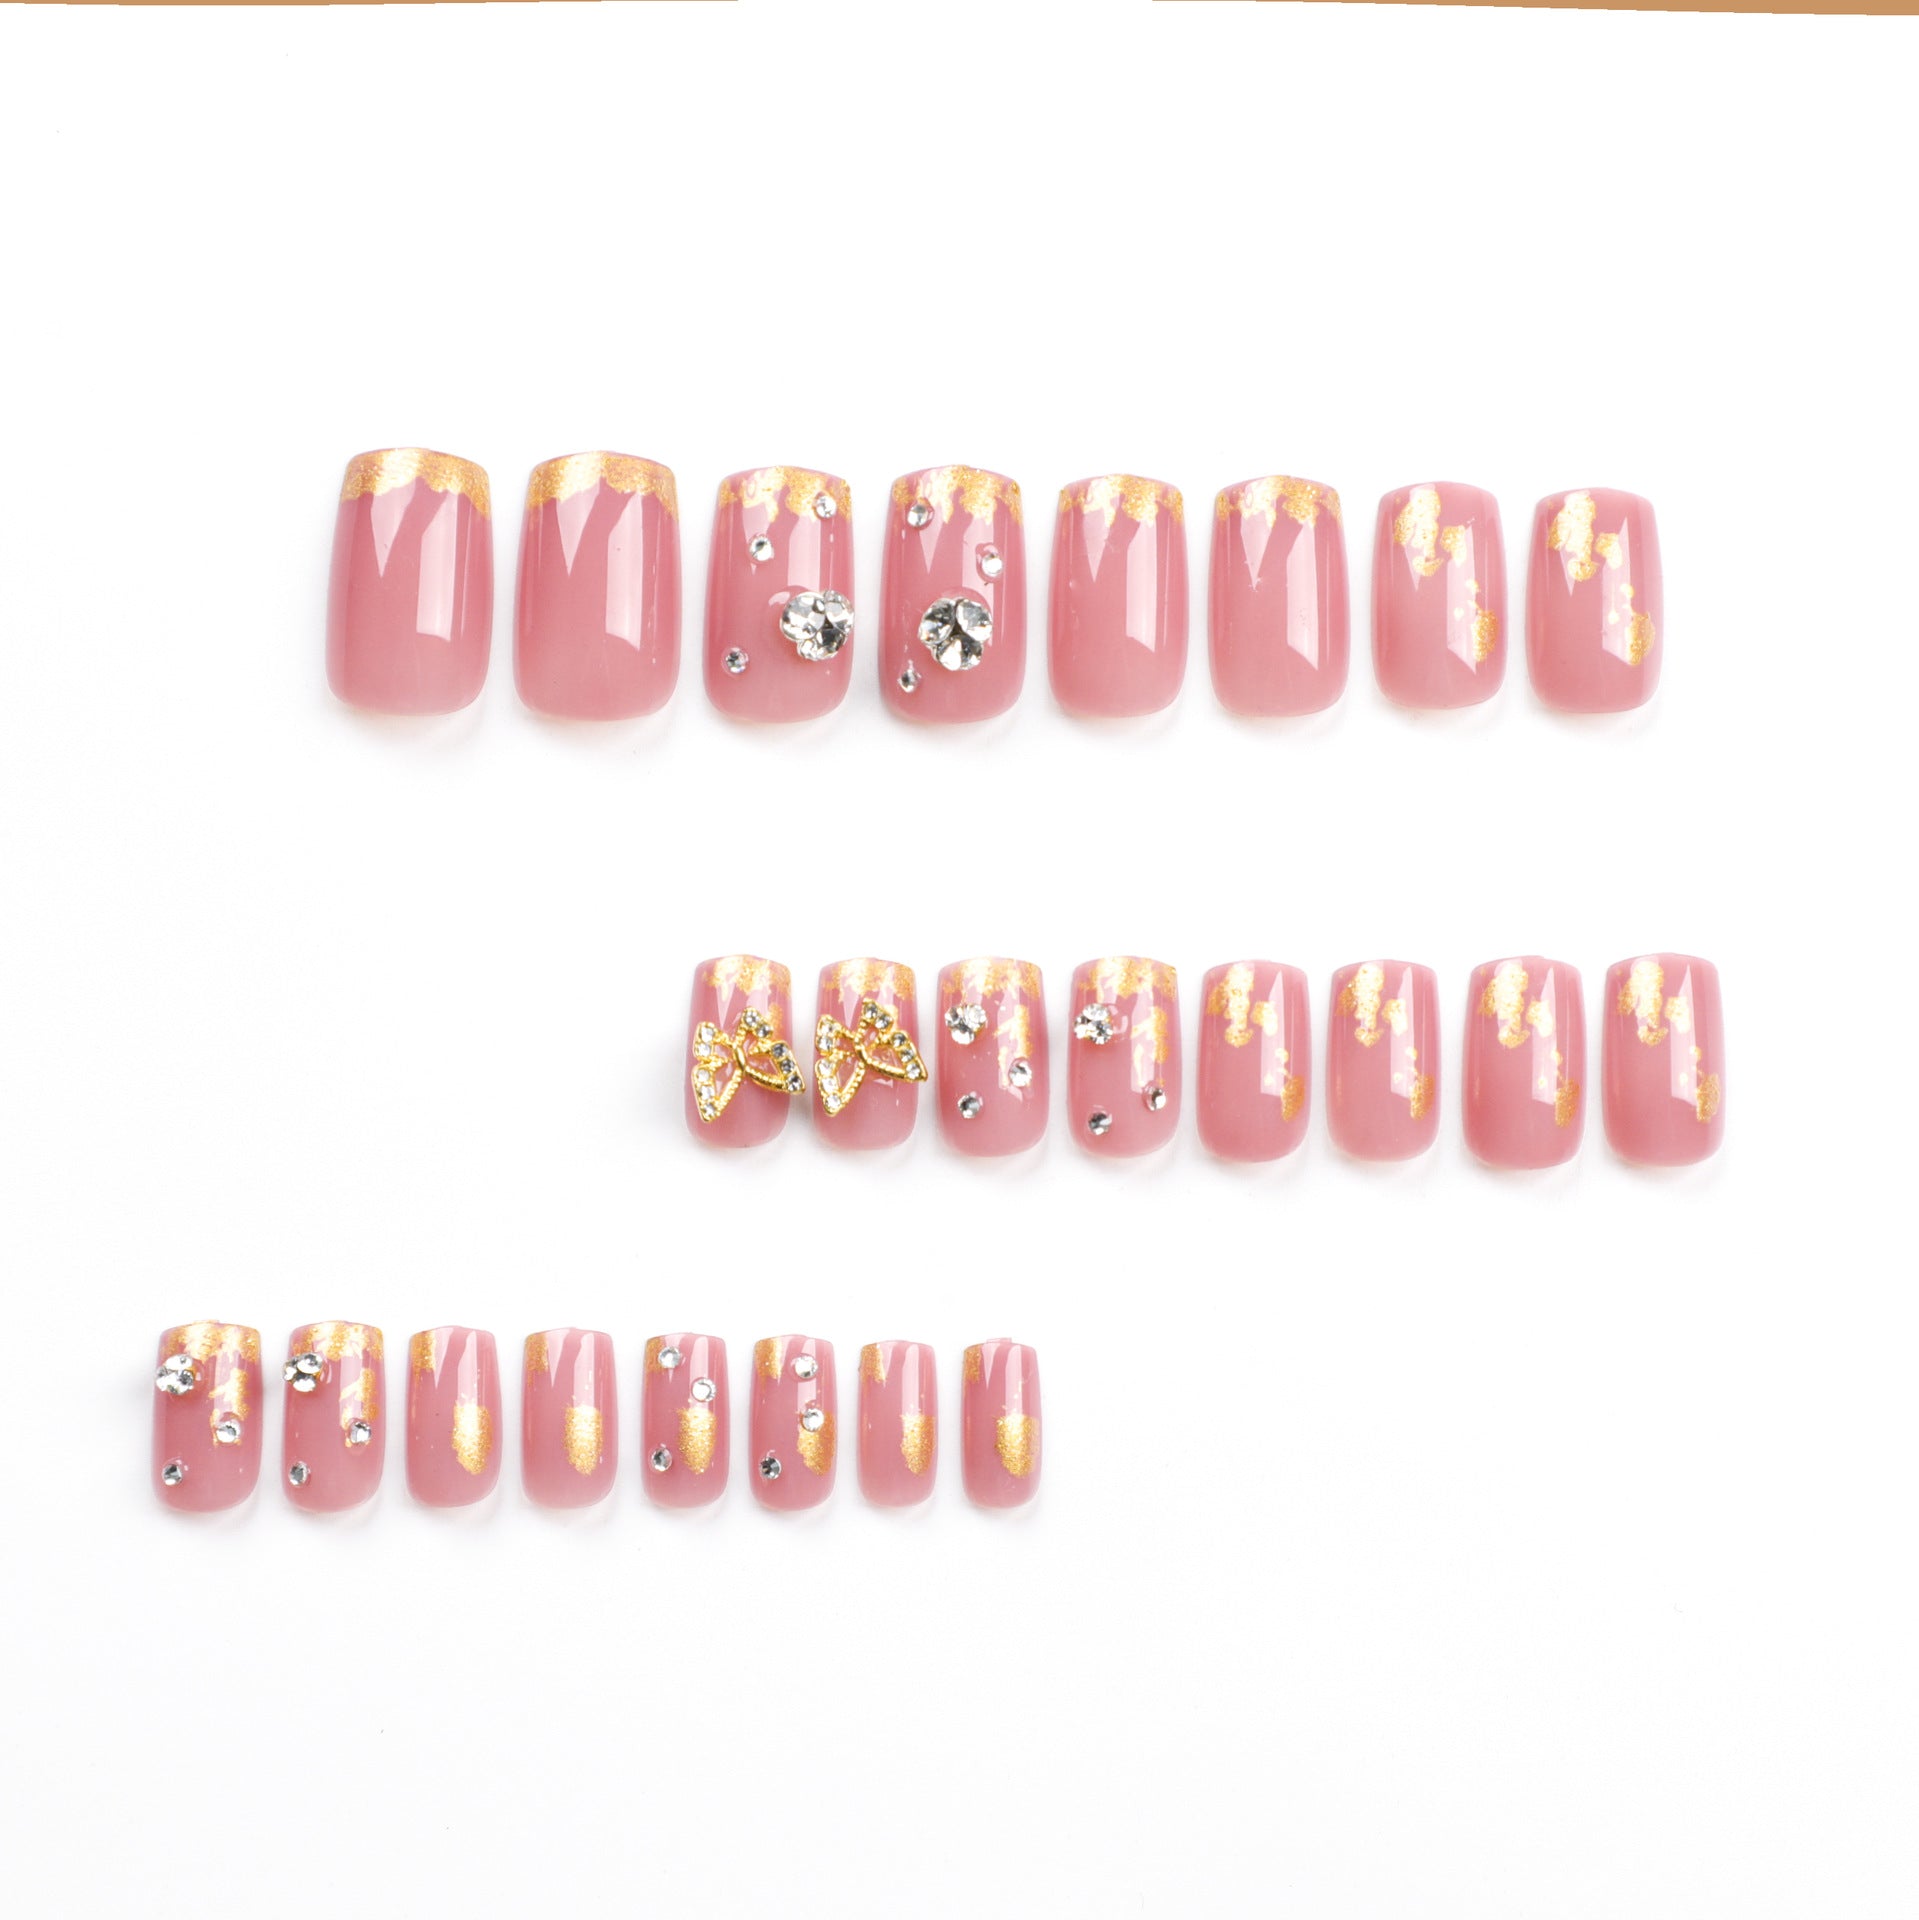 24 PCS MEDIUM SQUARE GOLDEN BUTTERFLY PRESS ON NAILS